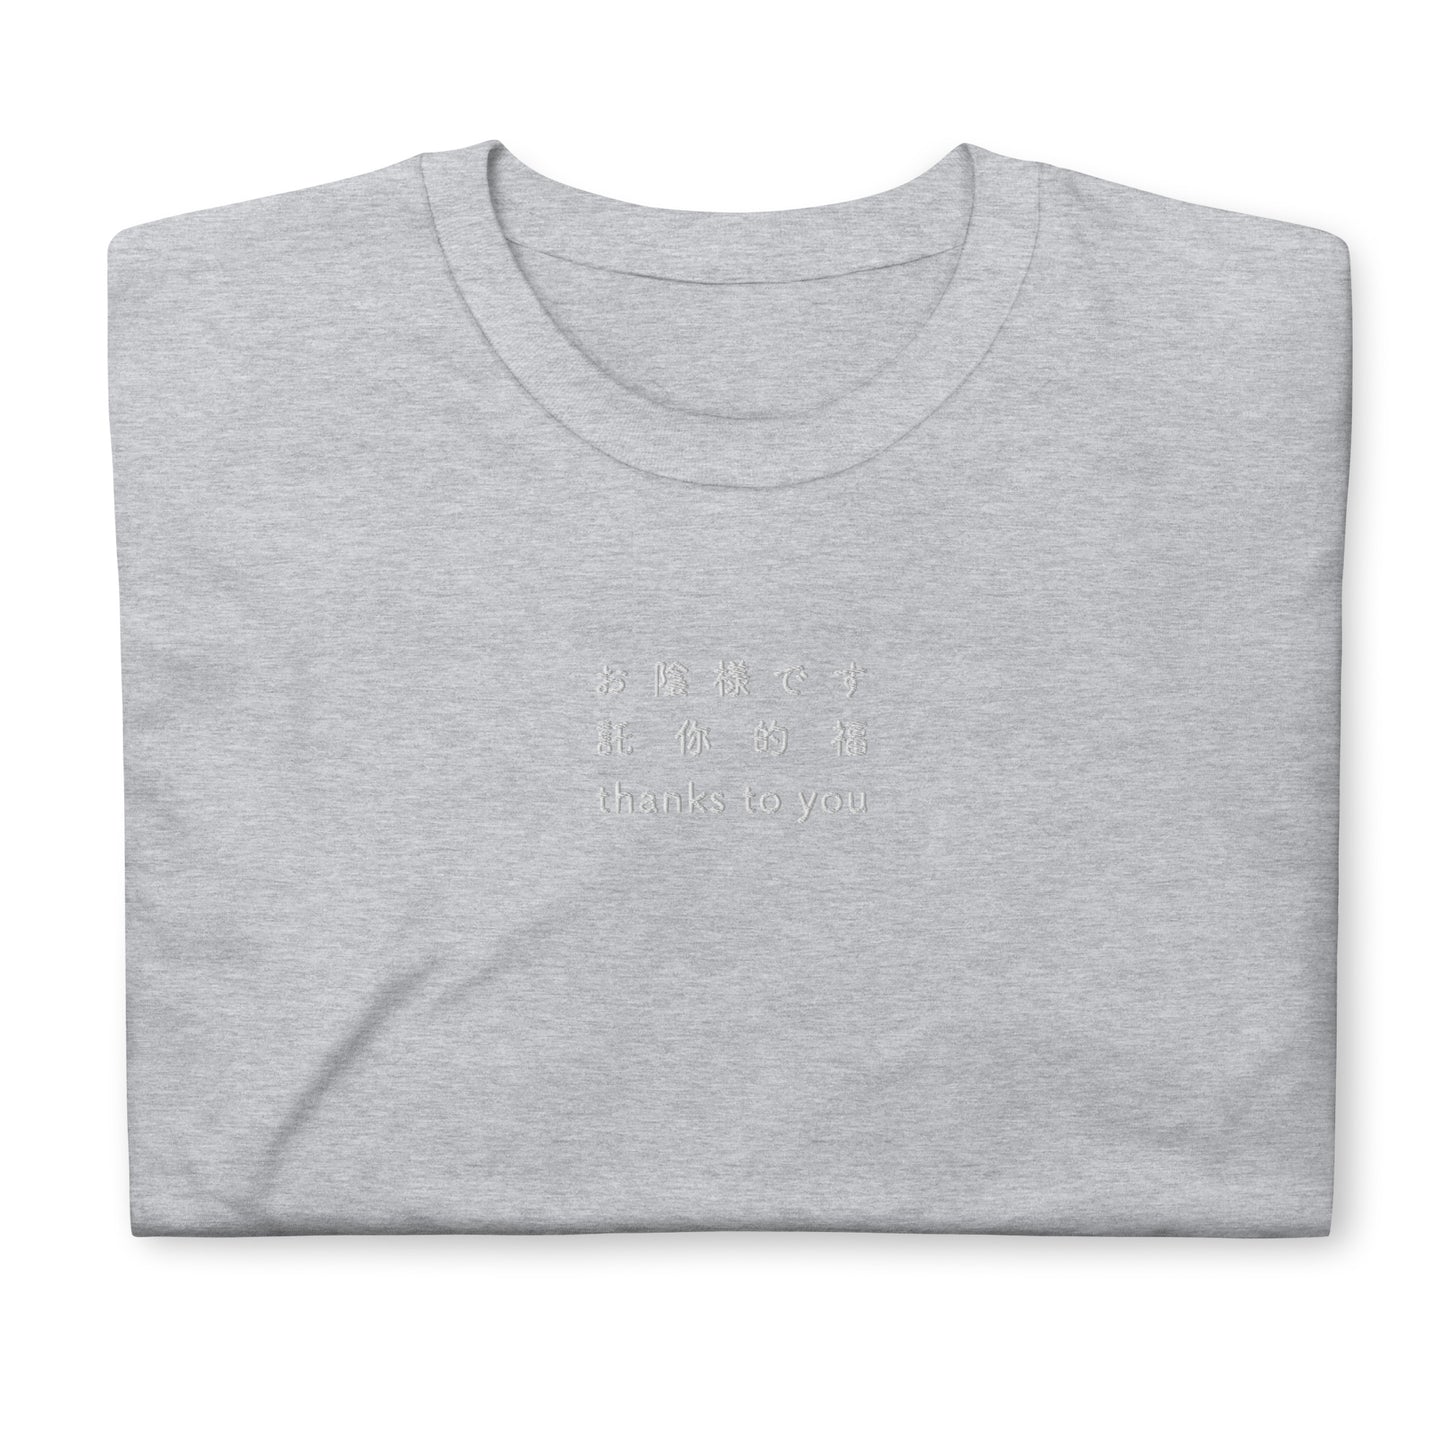 Light Gray High Quality Tee - Front Design with an white Embroidery "thanks to you" in Japanese,Chinese and English